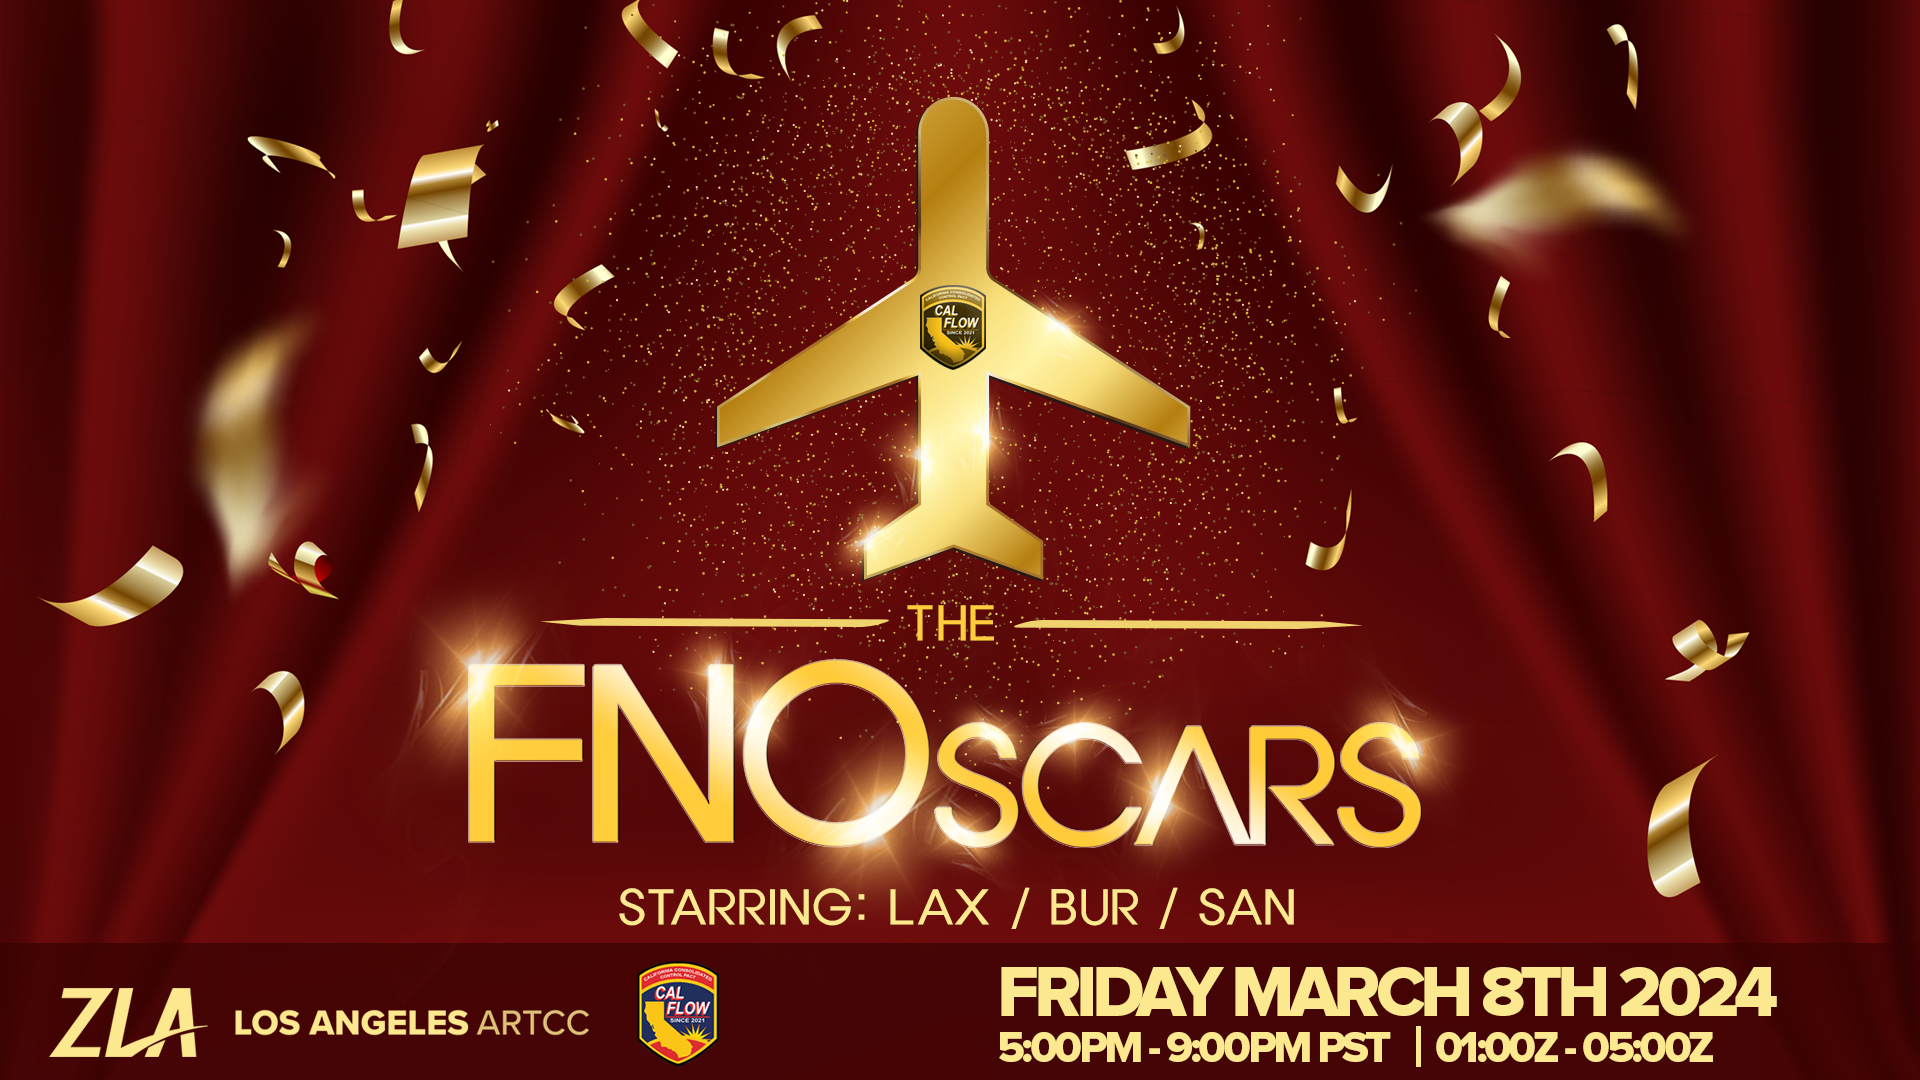 The FNOscars - Virtual Norwegian Events